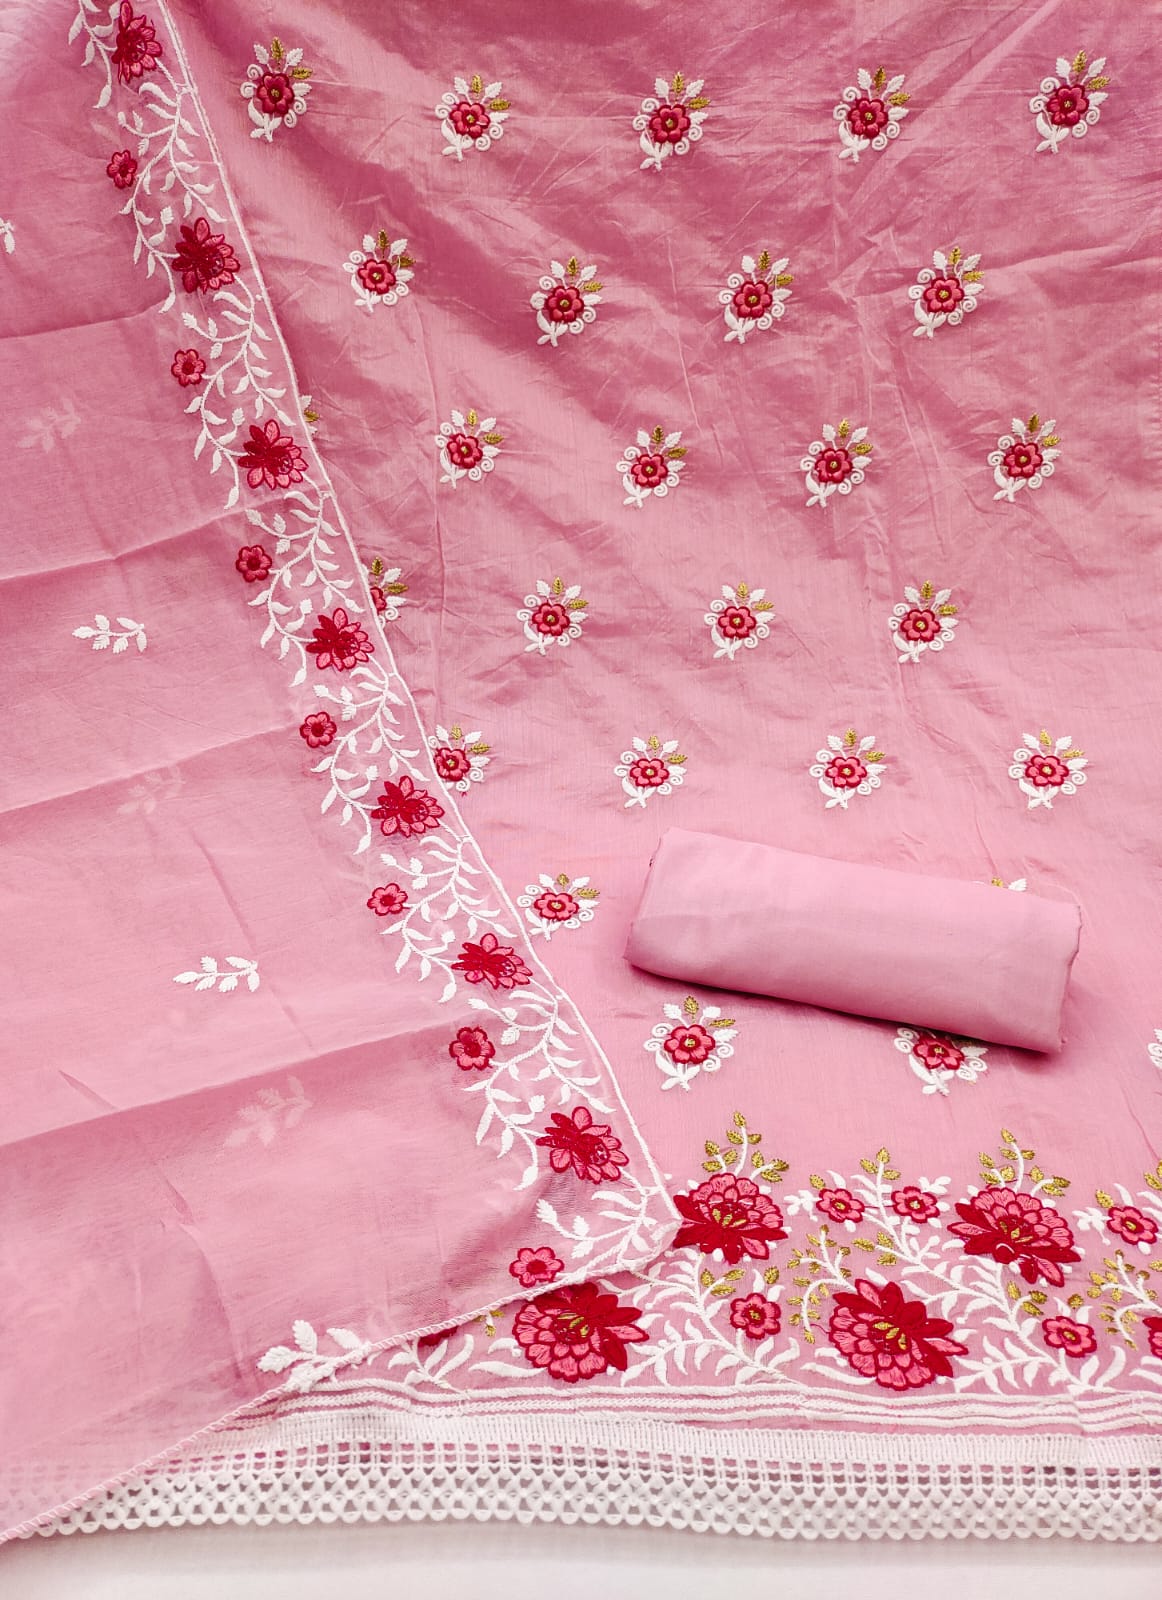 fcity.in - Partywear Banarasi Soft Chanderi Cotton Suit And Dress Material /